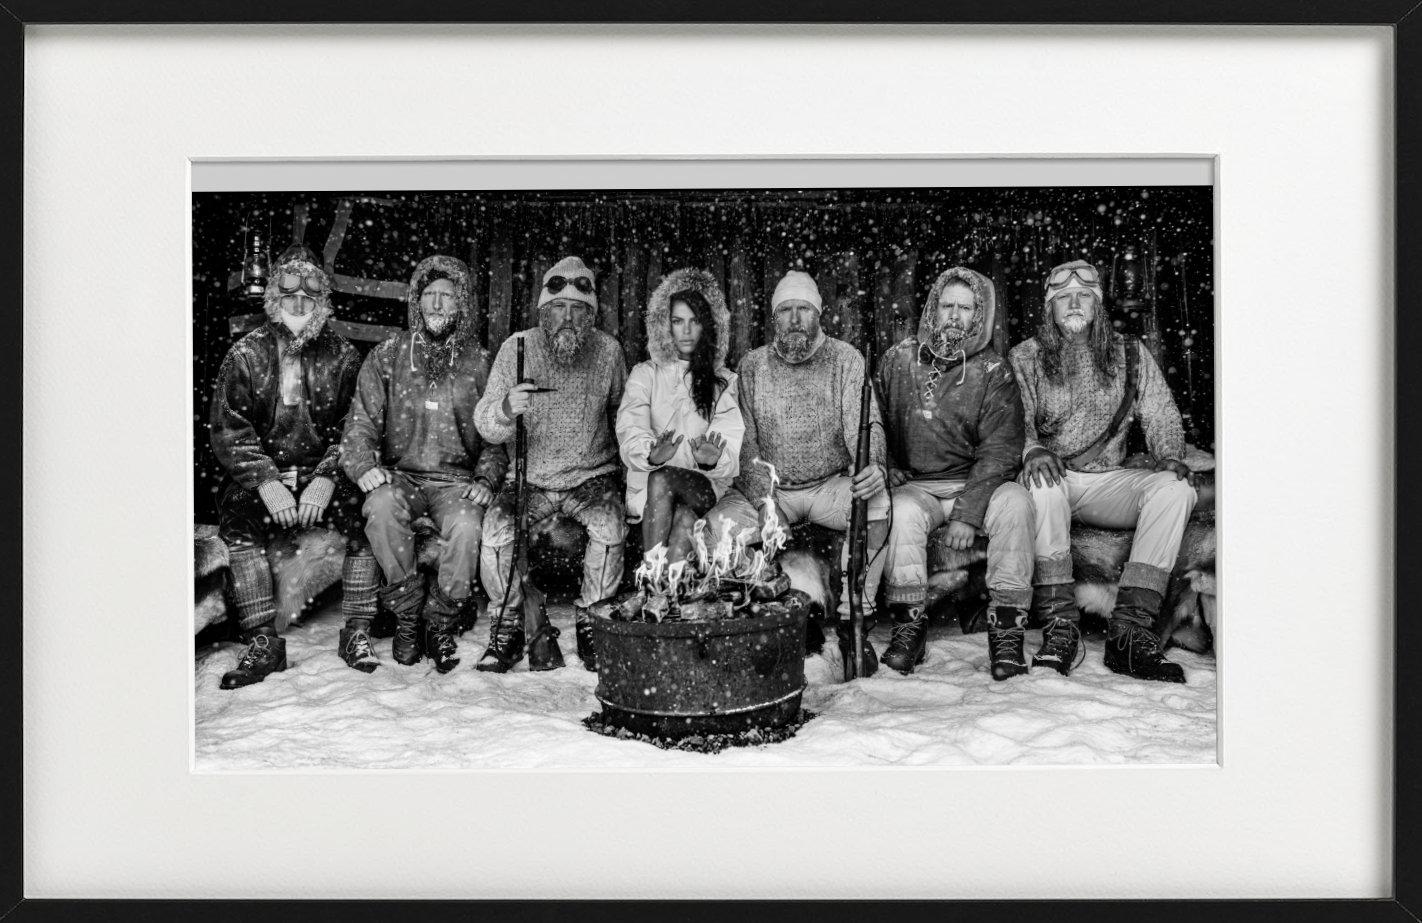 Ice Ice Baby - Model Brooks Nader with Polar Explorers Sitting Around Fireplace - Photograph by David Yarrow